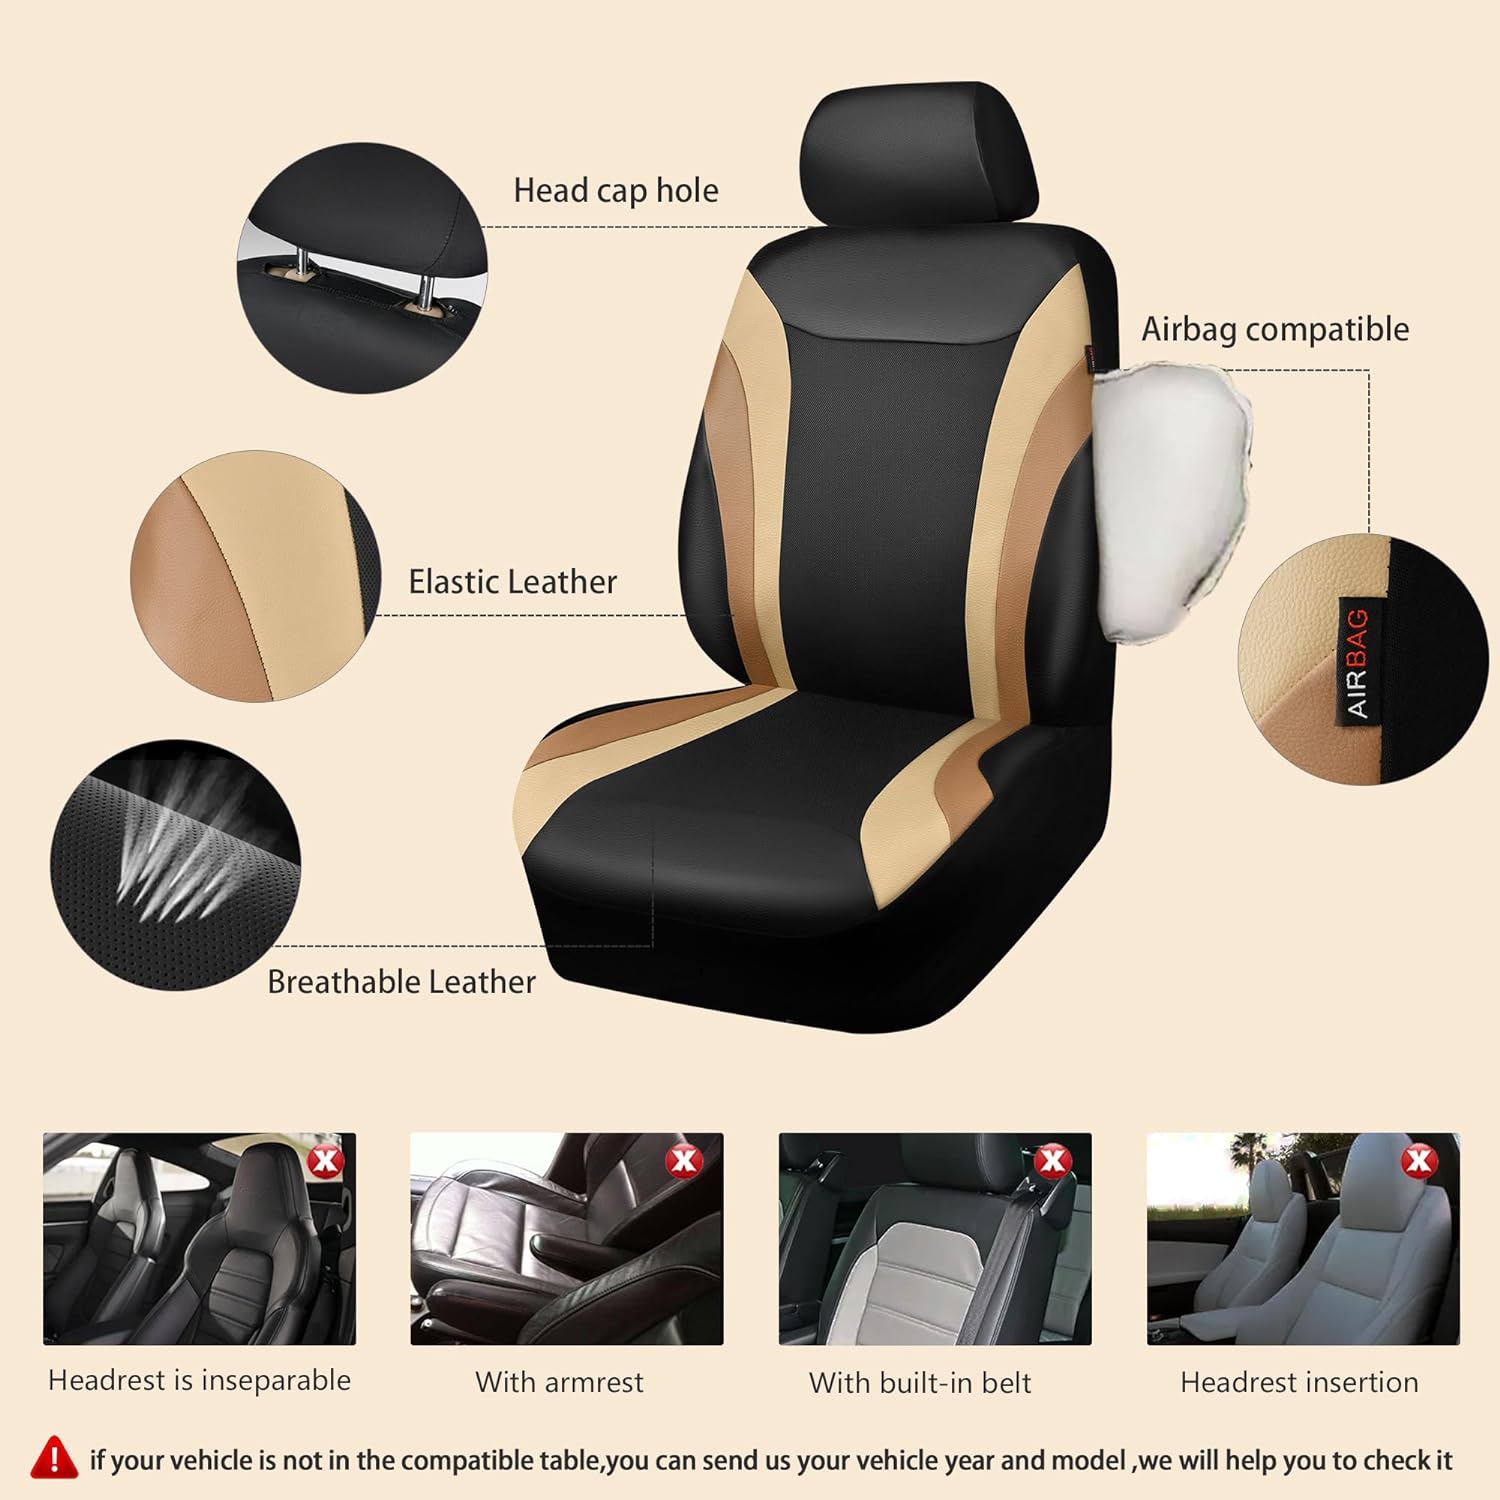 CAR PASS Jelly Leather Car Seat Covers Full Set,Waterproof Automotive Seat Covers for Cars SUV Sedan Truck,Airbag Compatible,Sporty Universal Fit for Cute Women Girl (Black and Red)